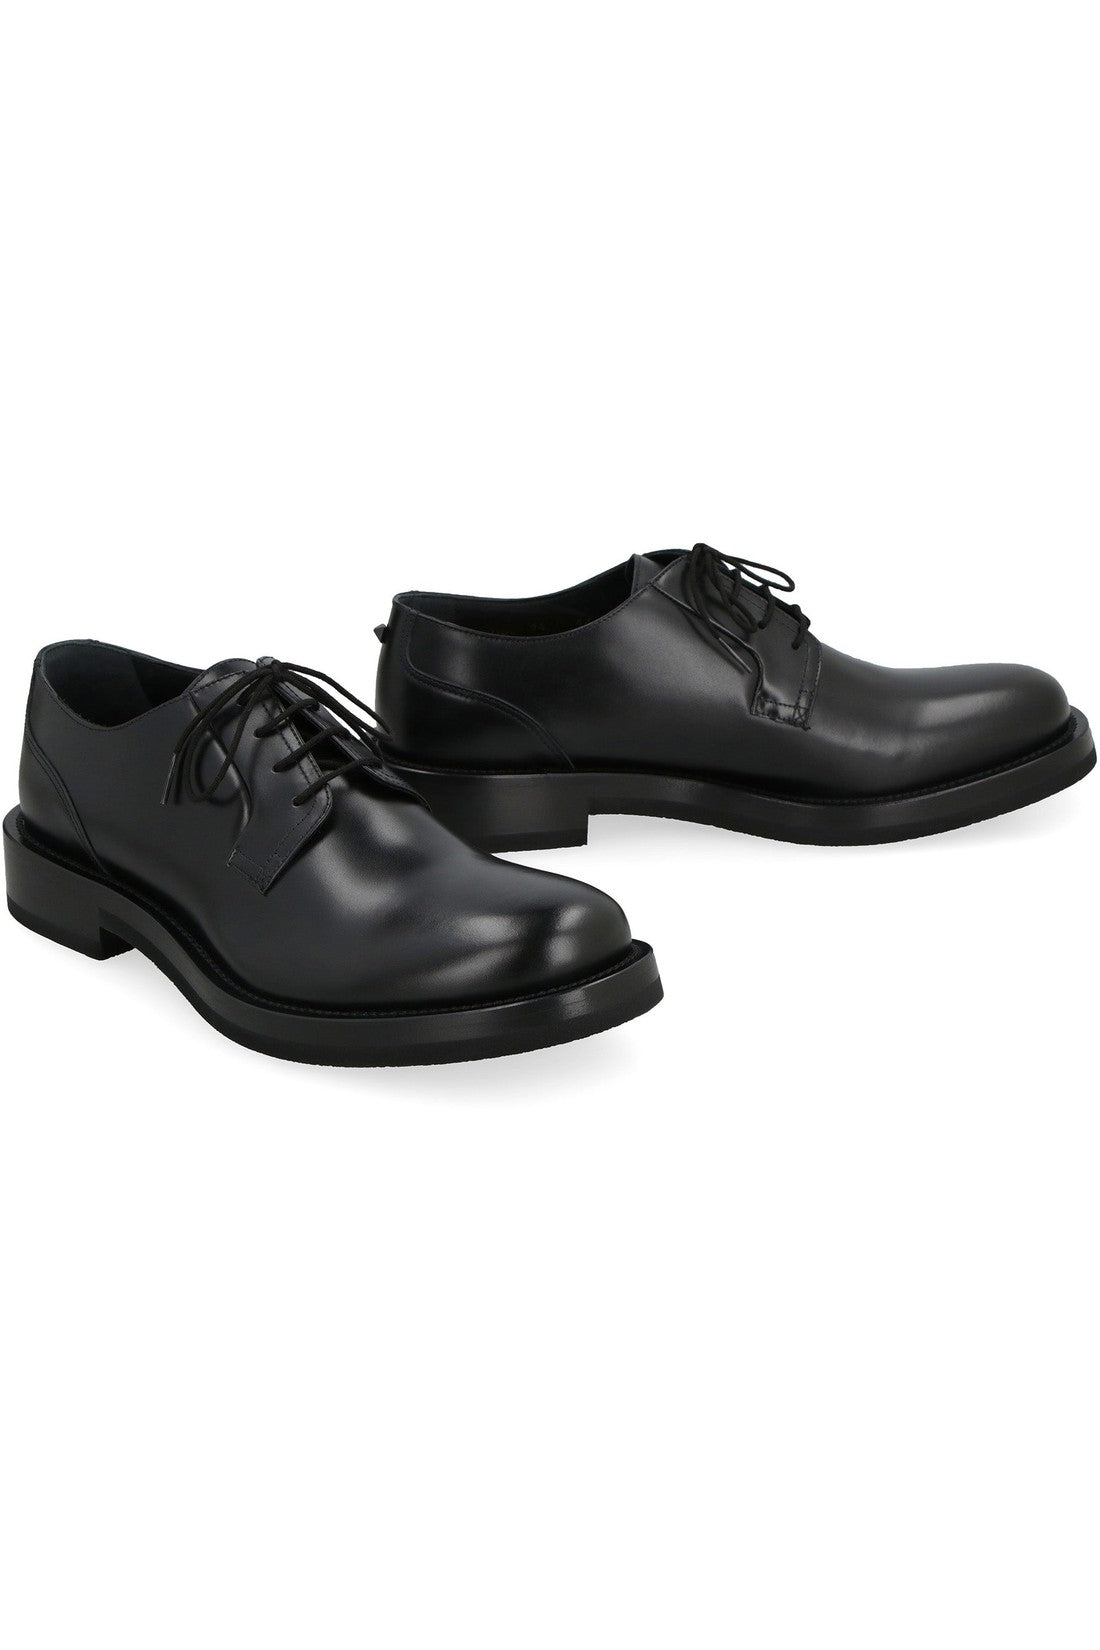 Valentino-OUTLET-SALE-Derby Rockstud Essential leather lace-up shoes-ARCHIVIST